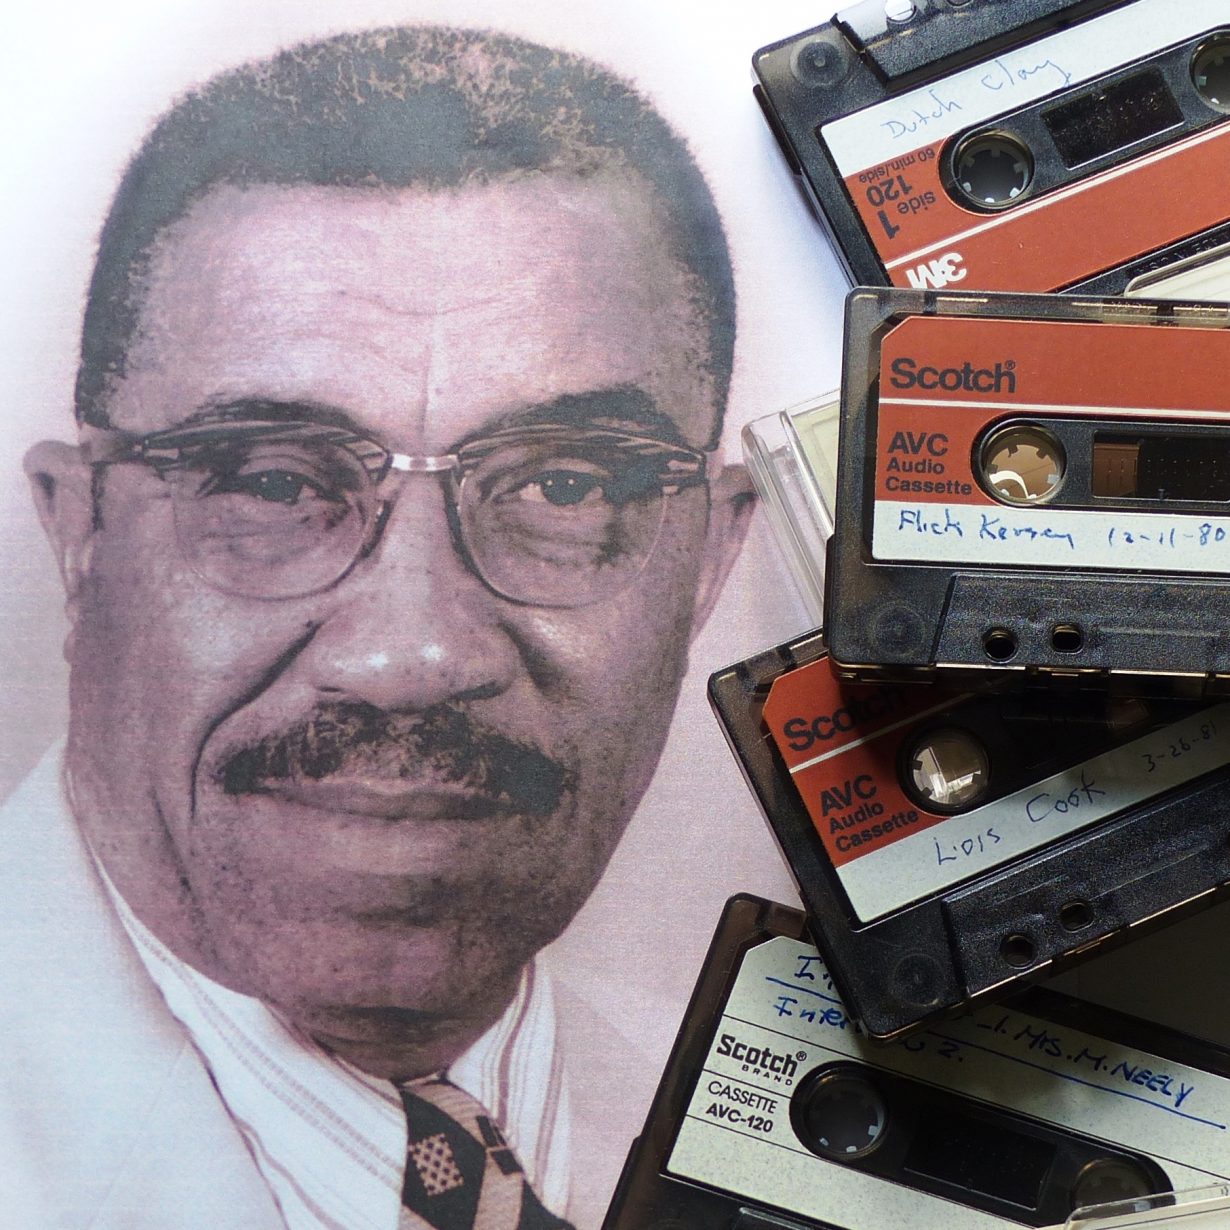 Casette tapes along side a photograph of A.P. Marshall